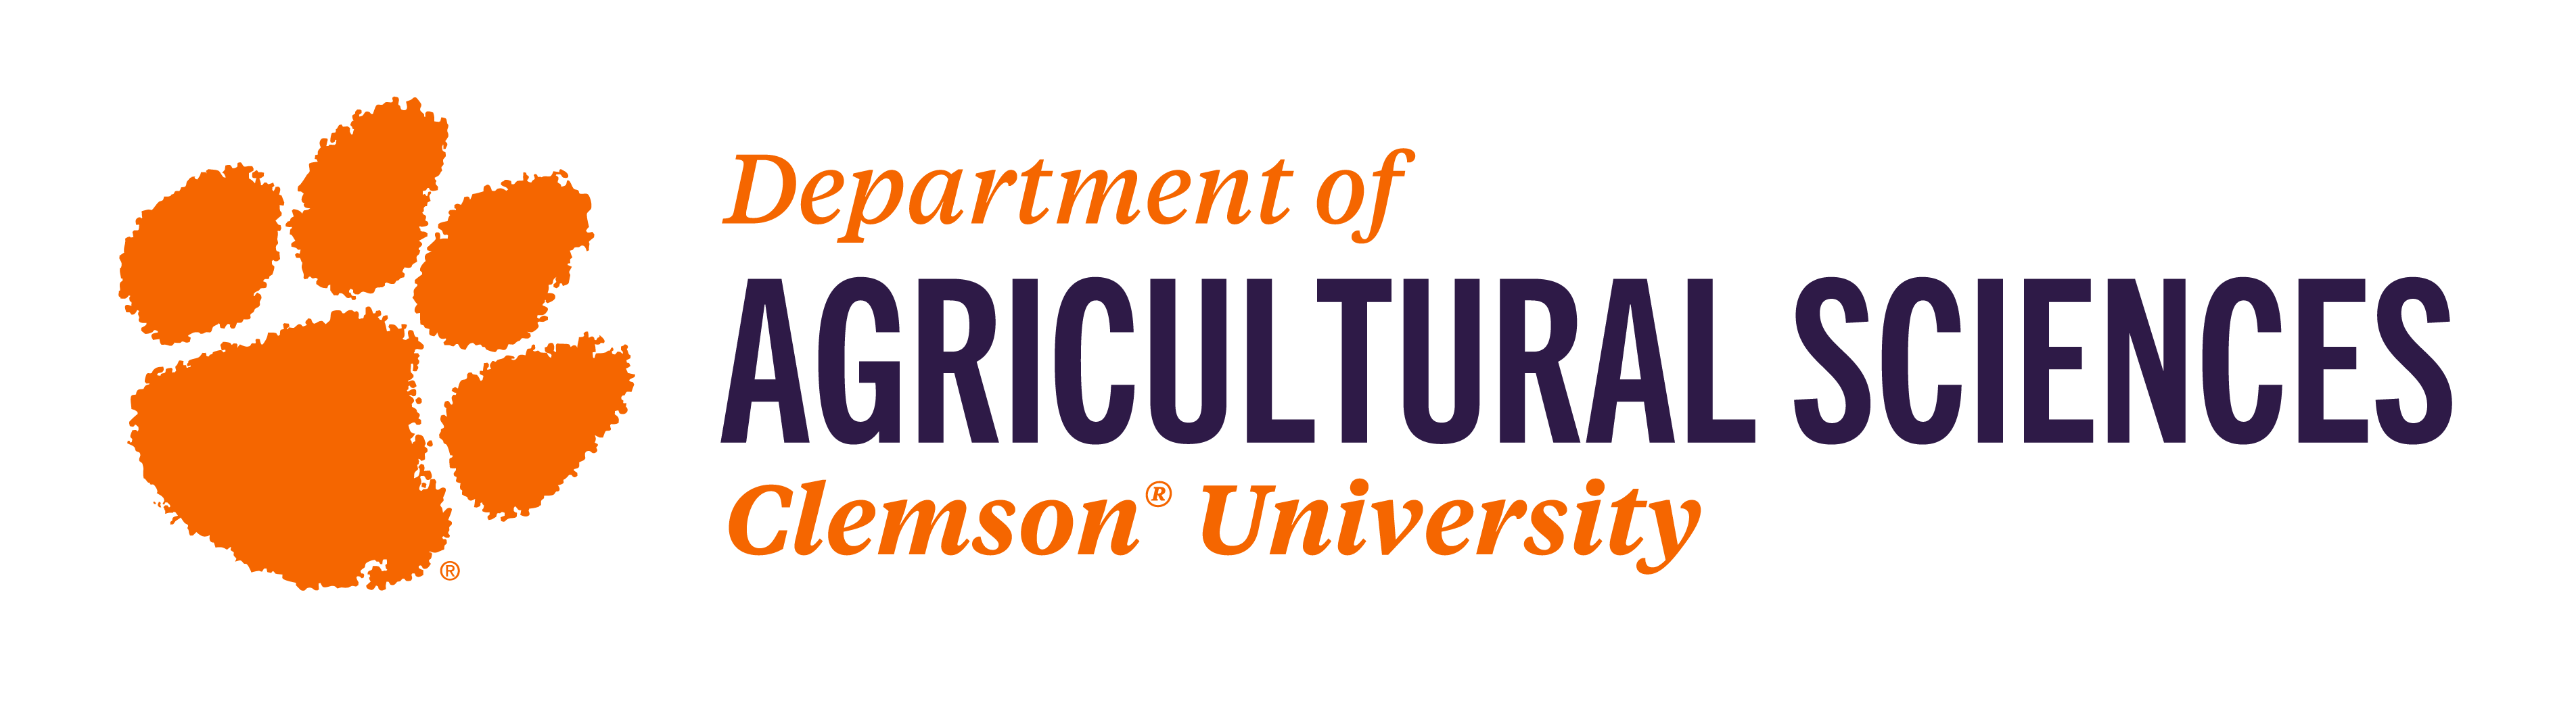 Agricultural Sciences logo with clemson